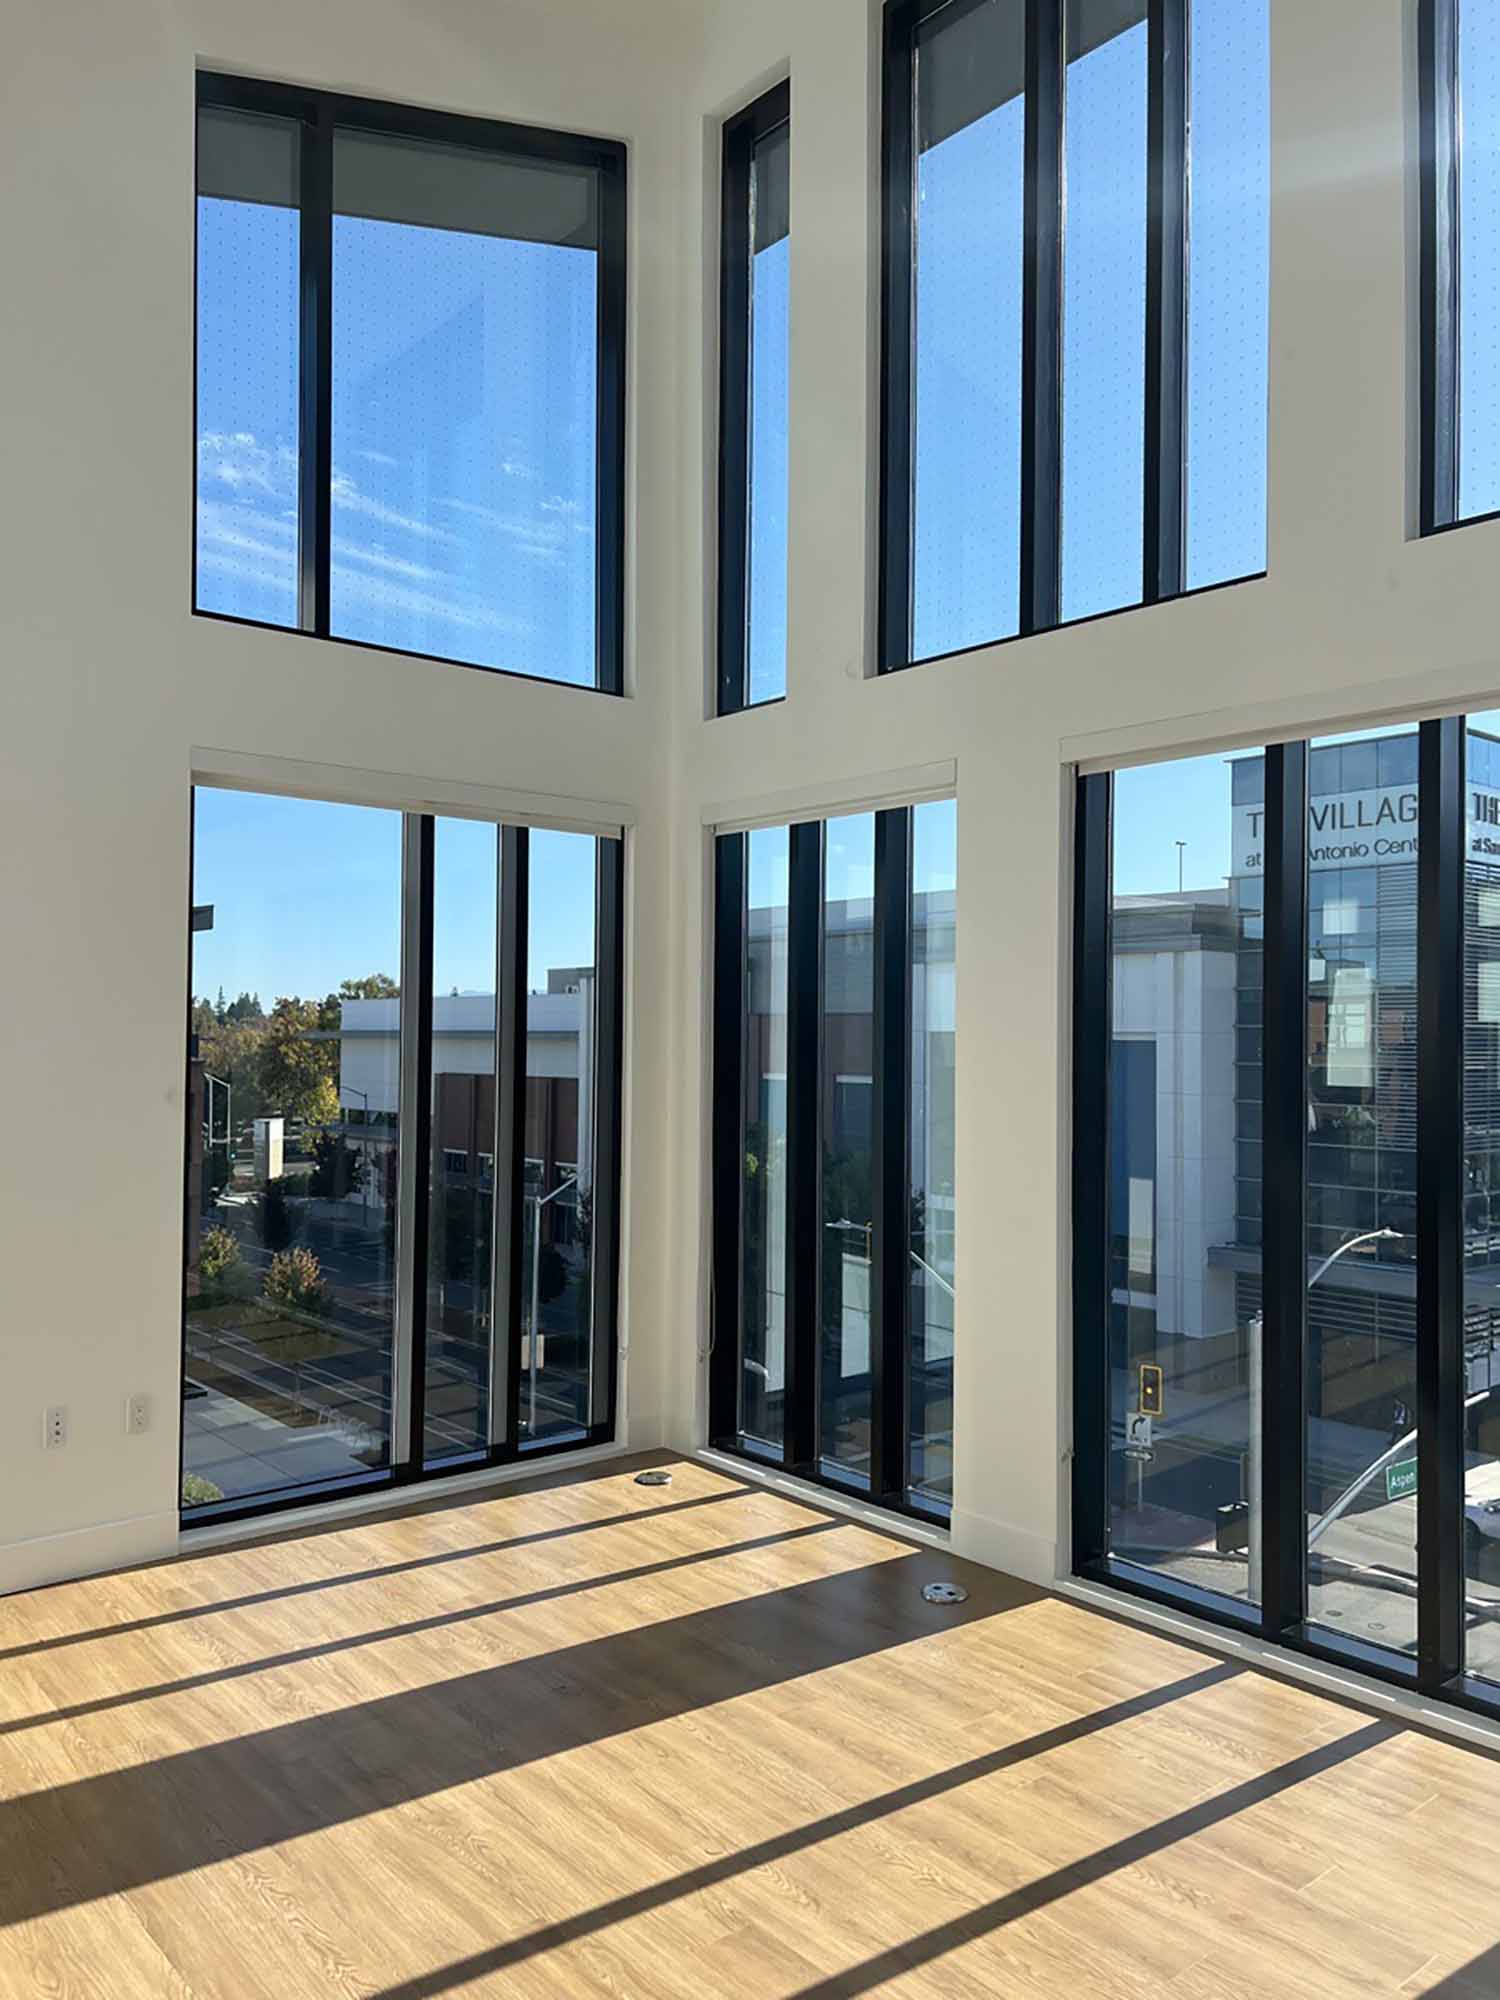 ClimatePro Installs 3M Sun Control Window Film for Mountain View, CA